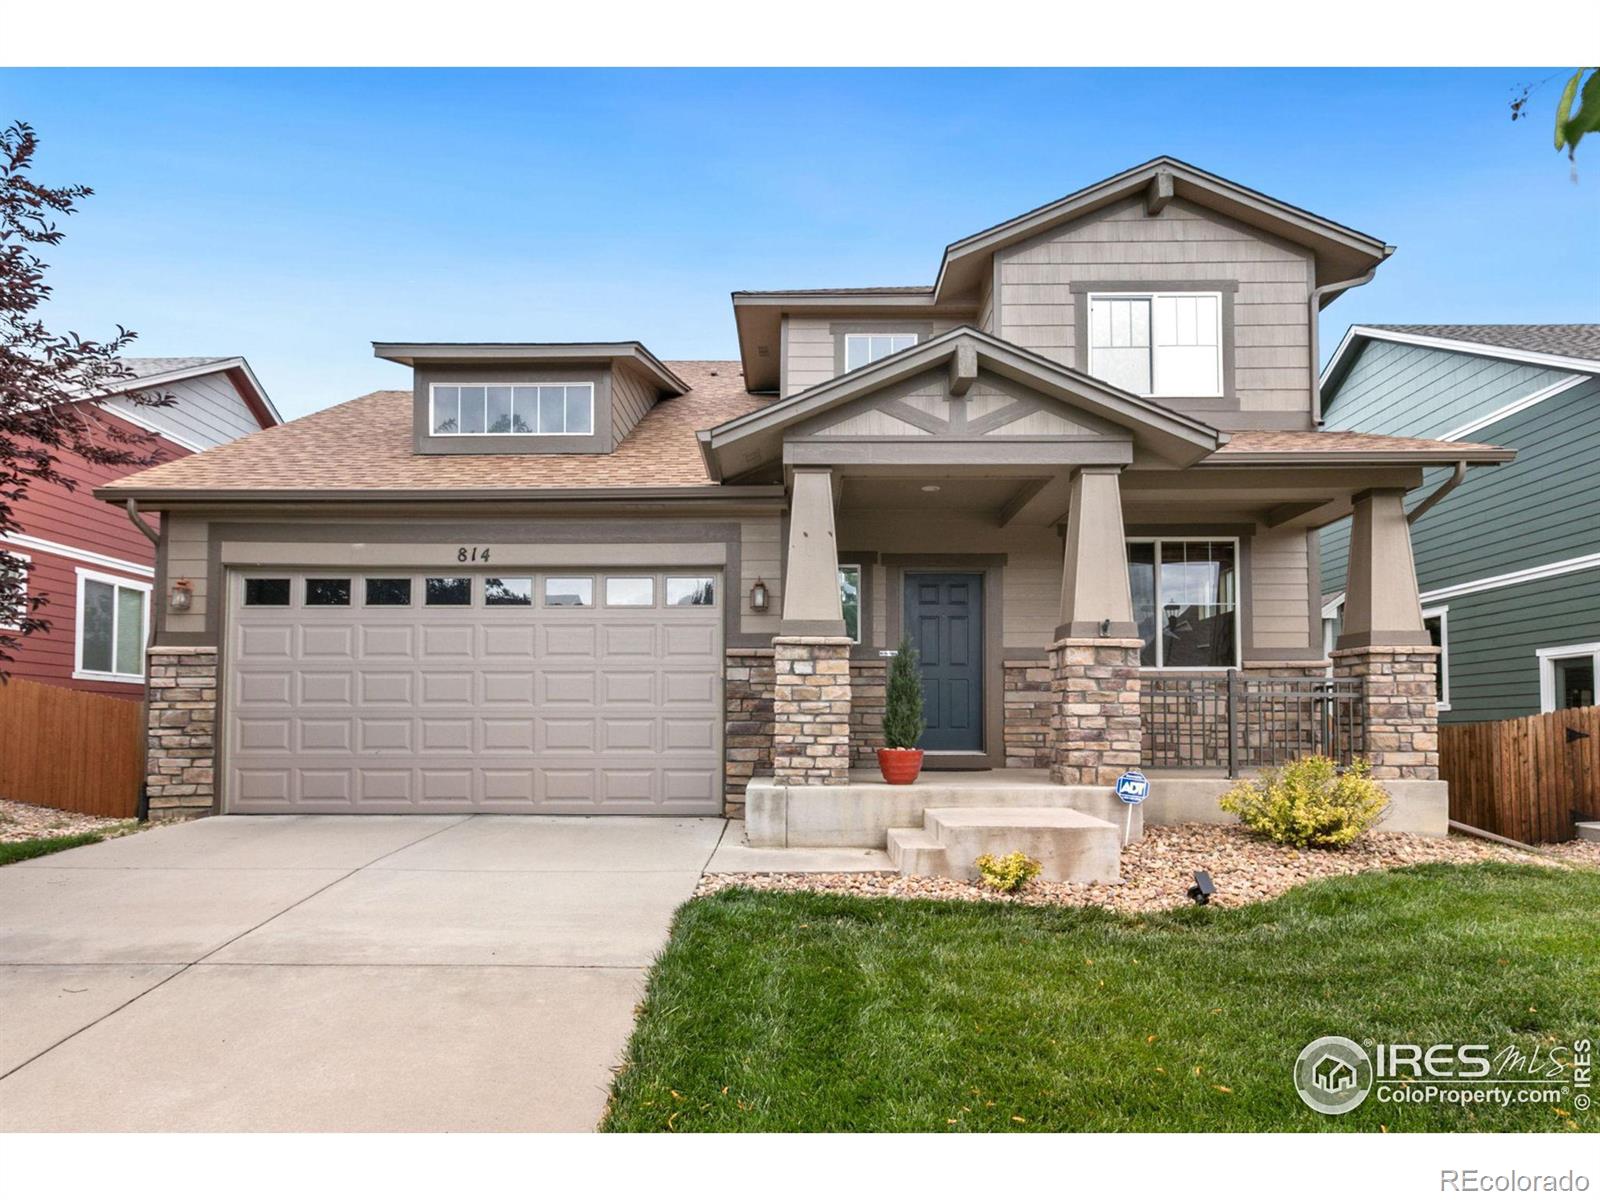 814  Snowy Plain Road, fort collins MLS: 123456789993281 Beds: 3 Baths: 3 Price: $612,000